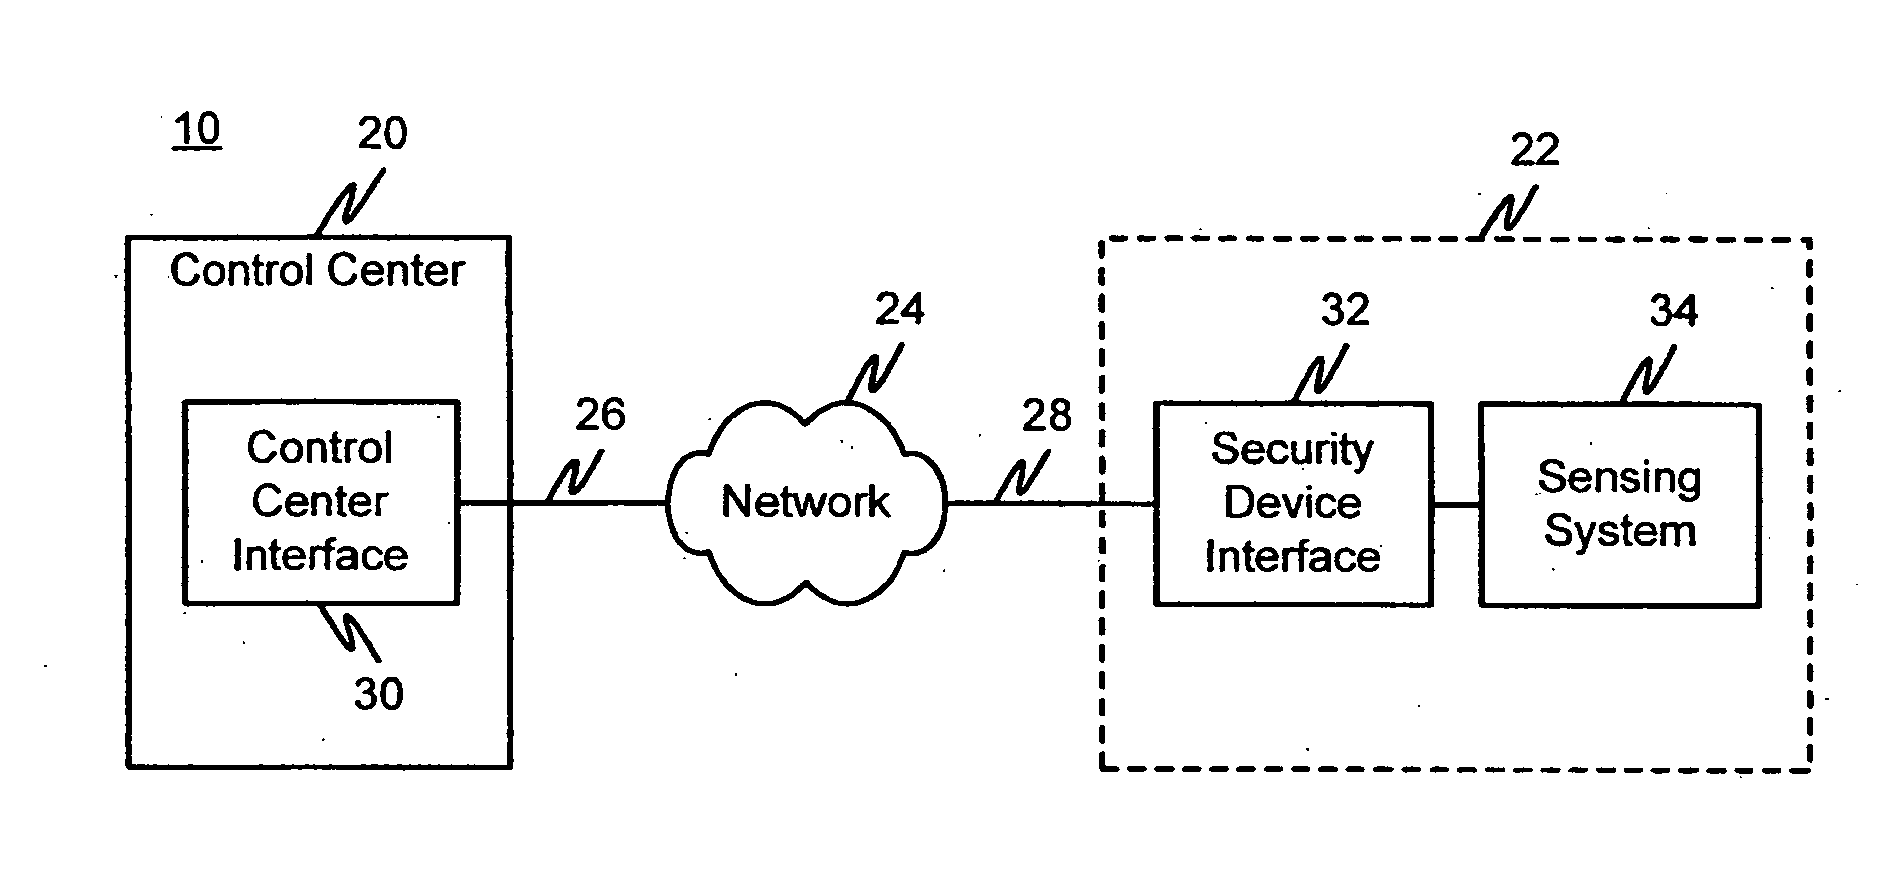 Service oriented security device management network